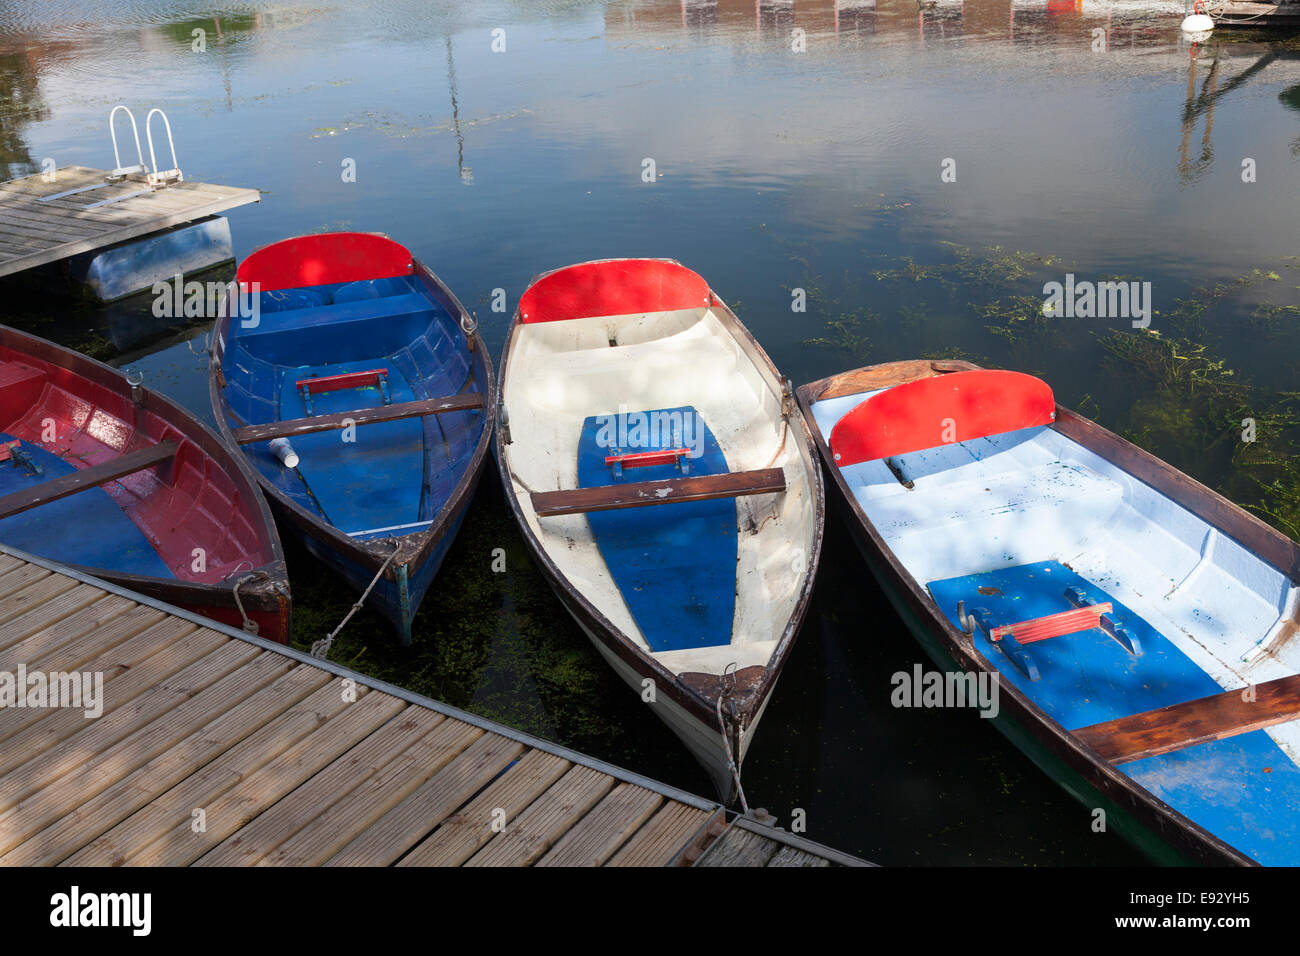 dinghies for hire in Southgate Canal Basin, Chichester, West Sussex Stock Photo